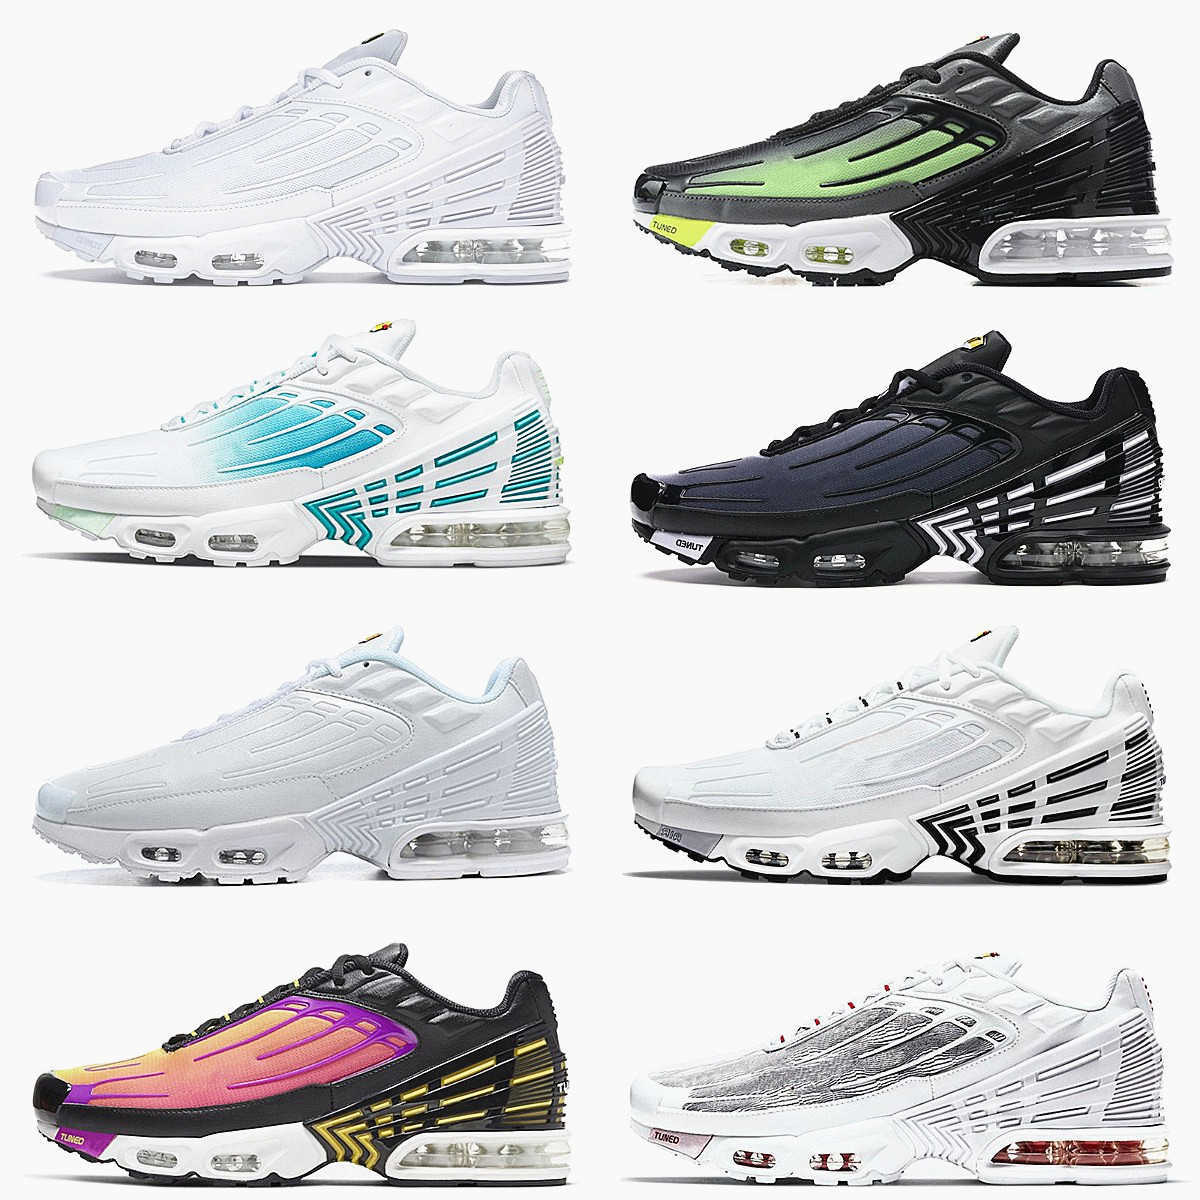 

Designers Tn Plus 3 Tuned III 3s Men Sports Shoes Laser Blue White Aquamarine Leather Obsidian Hyper Violet Deep Parachute Ghost Green Triple Black Trainer Sneakers, Please contact us